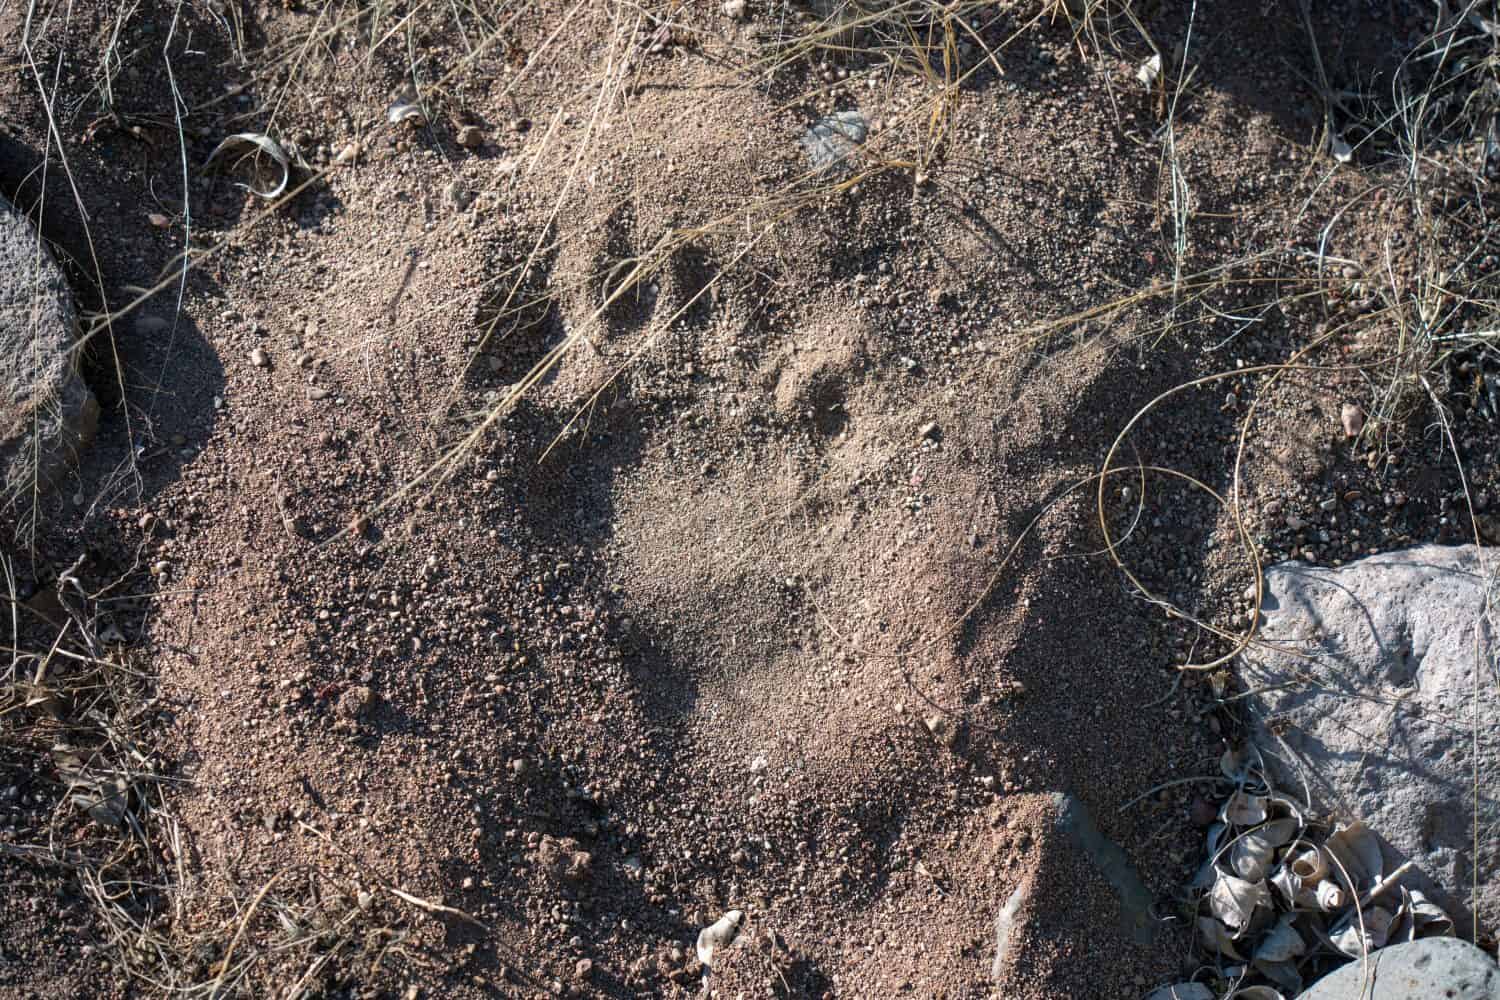 Black Bear Foot Print in Sand - New Mexico Wilderness and Animals